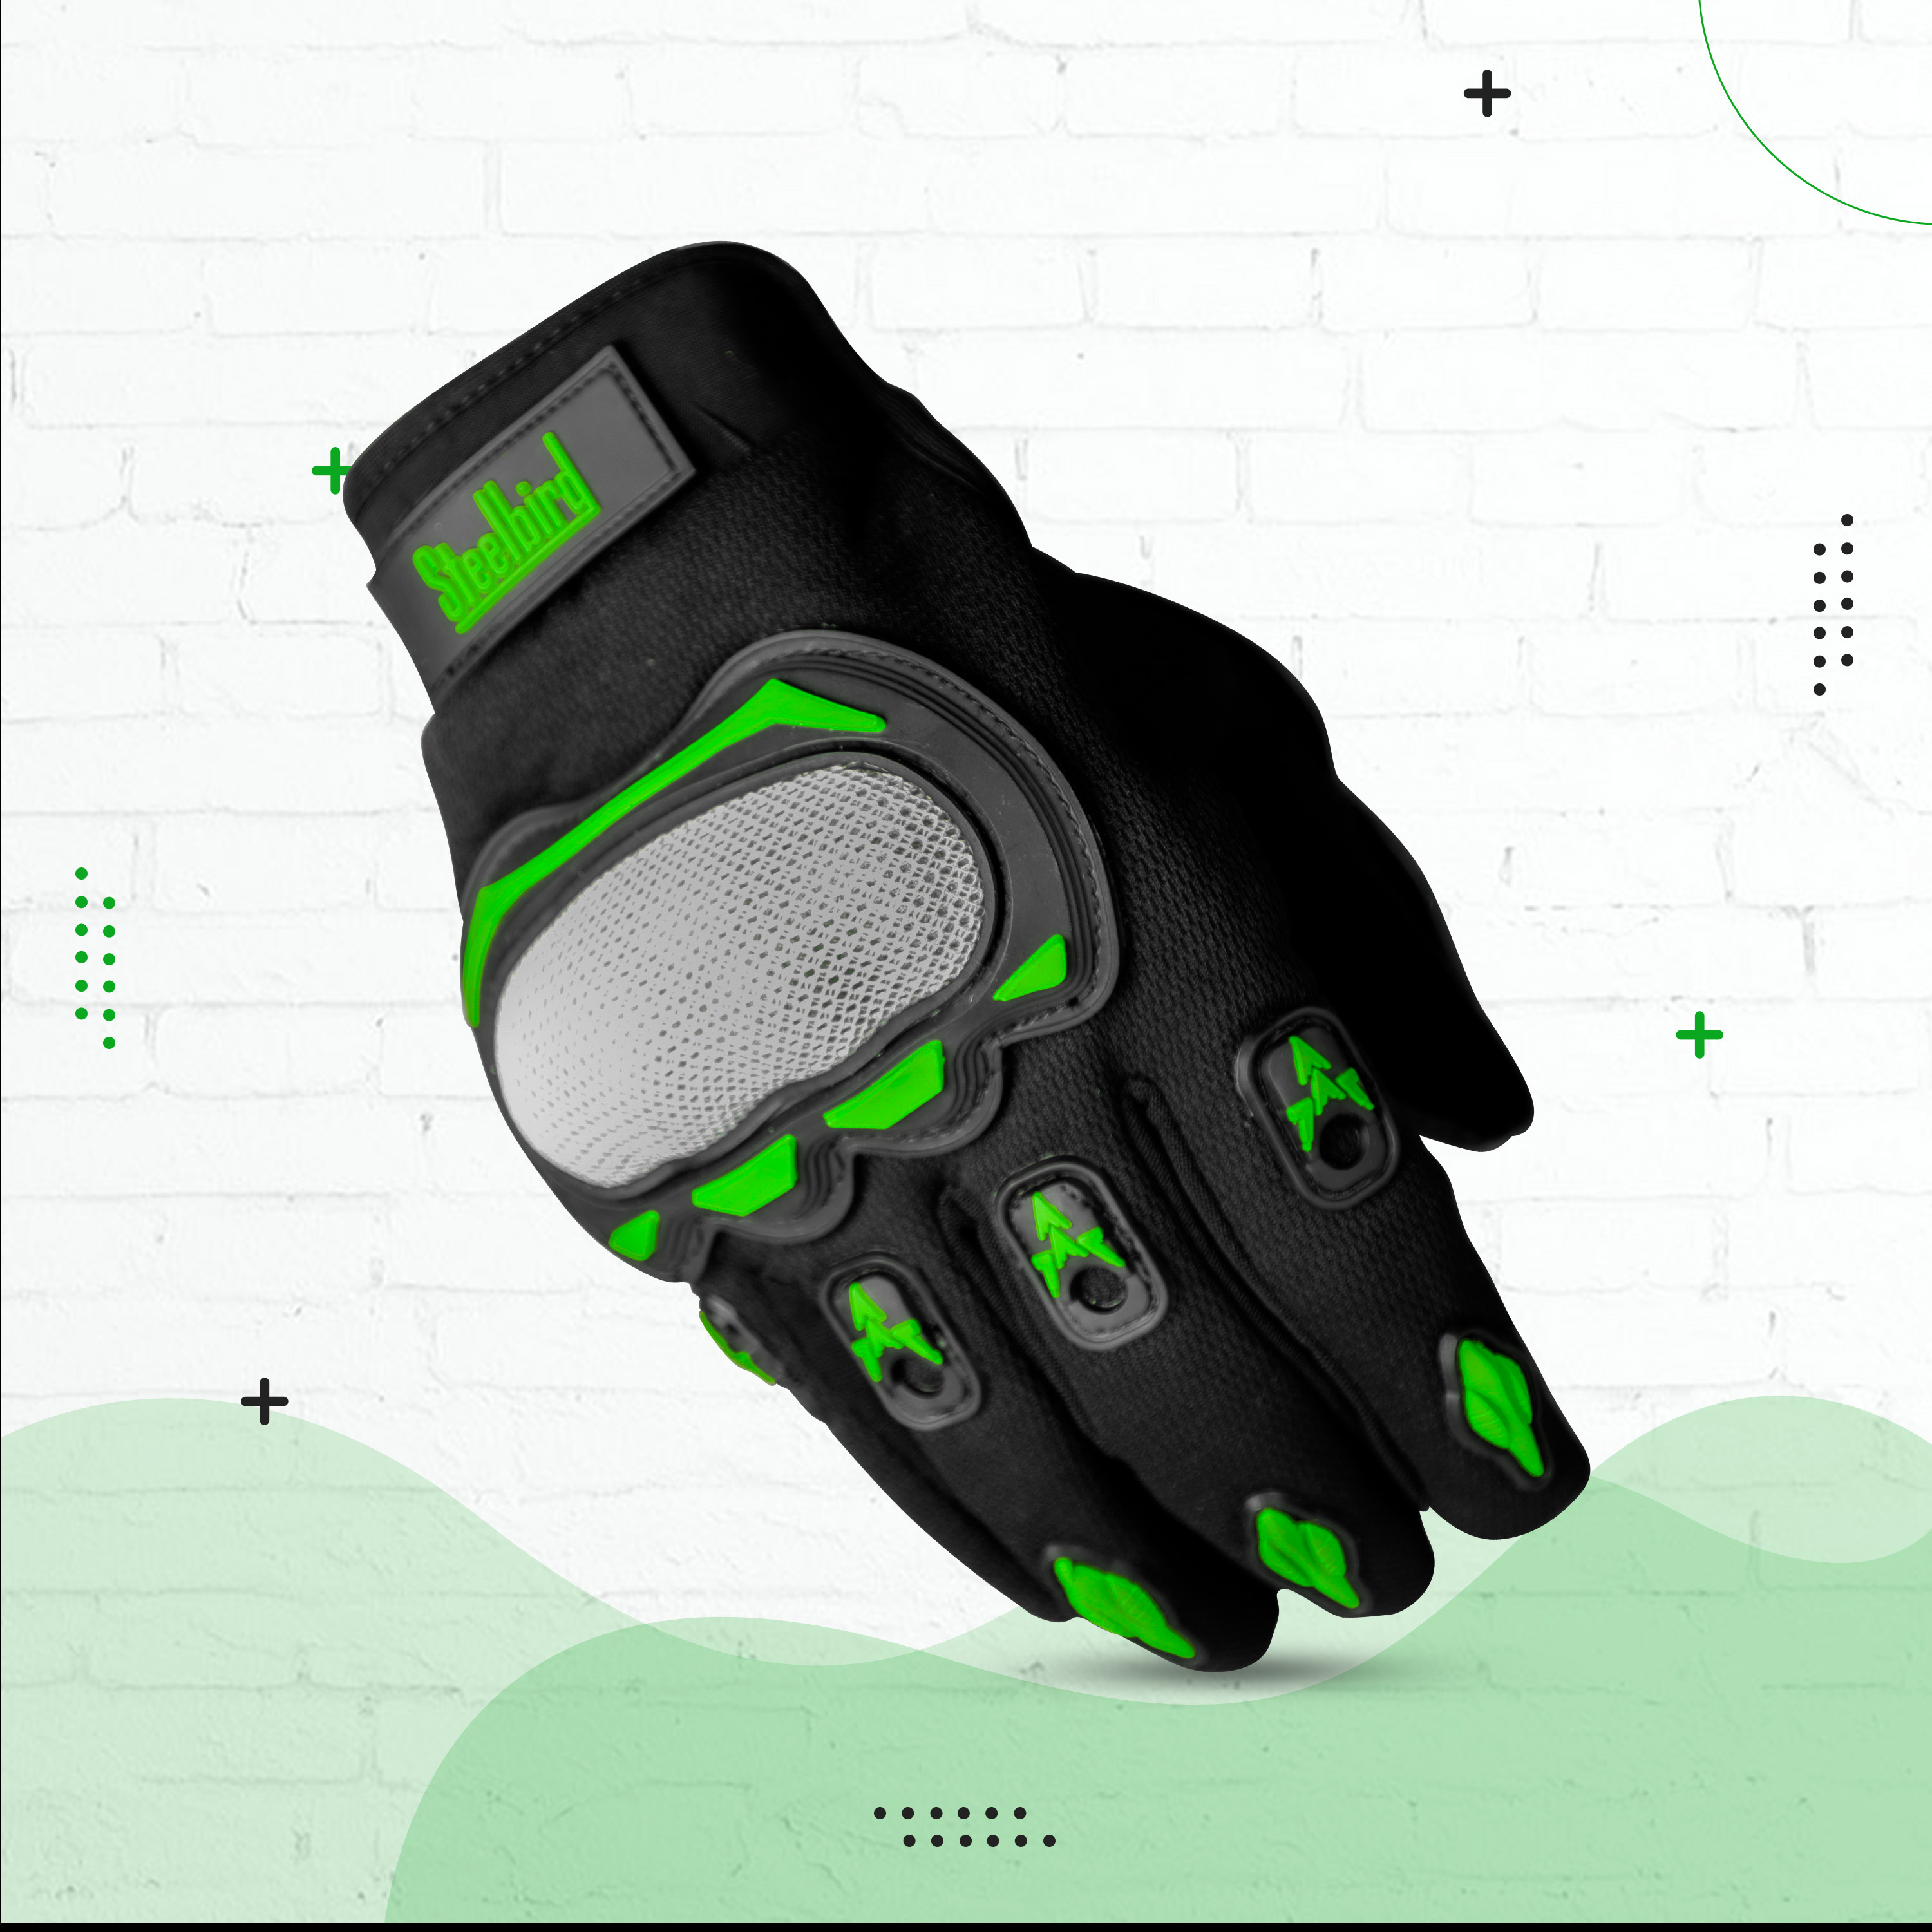 Steelbird Experience 1.0 Reflective Full Finger Bike Riding Gloves With Touch Screen Sensitivity At Thumb And Index Finger, Protective Off-Road Motorbike Racing (Black Green)